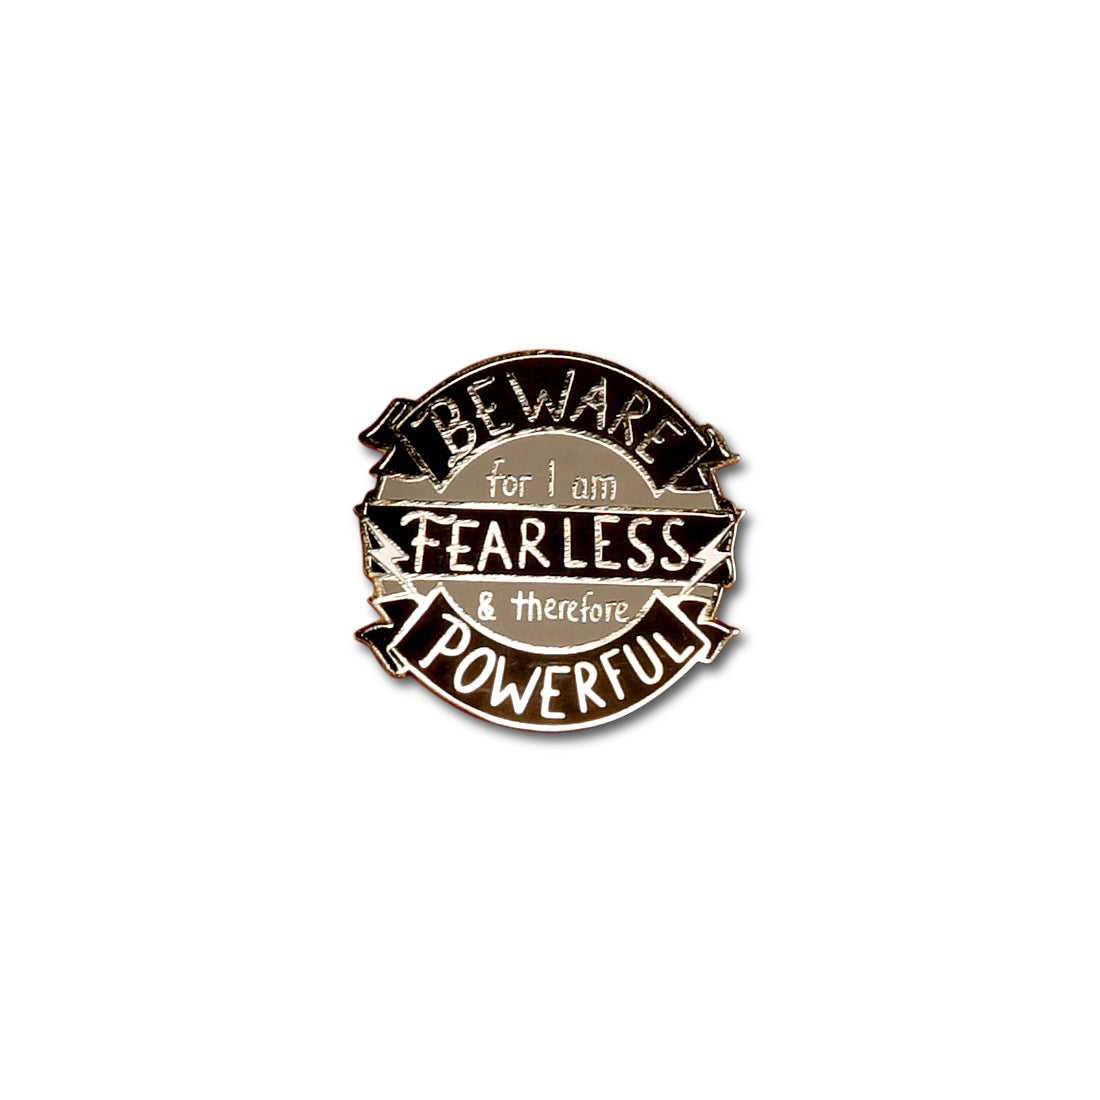 Beware for I am fearless and therefore powerful Enamel pin